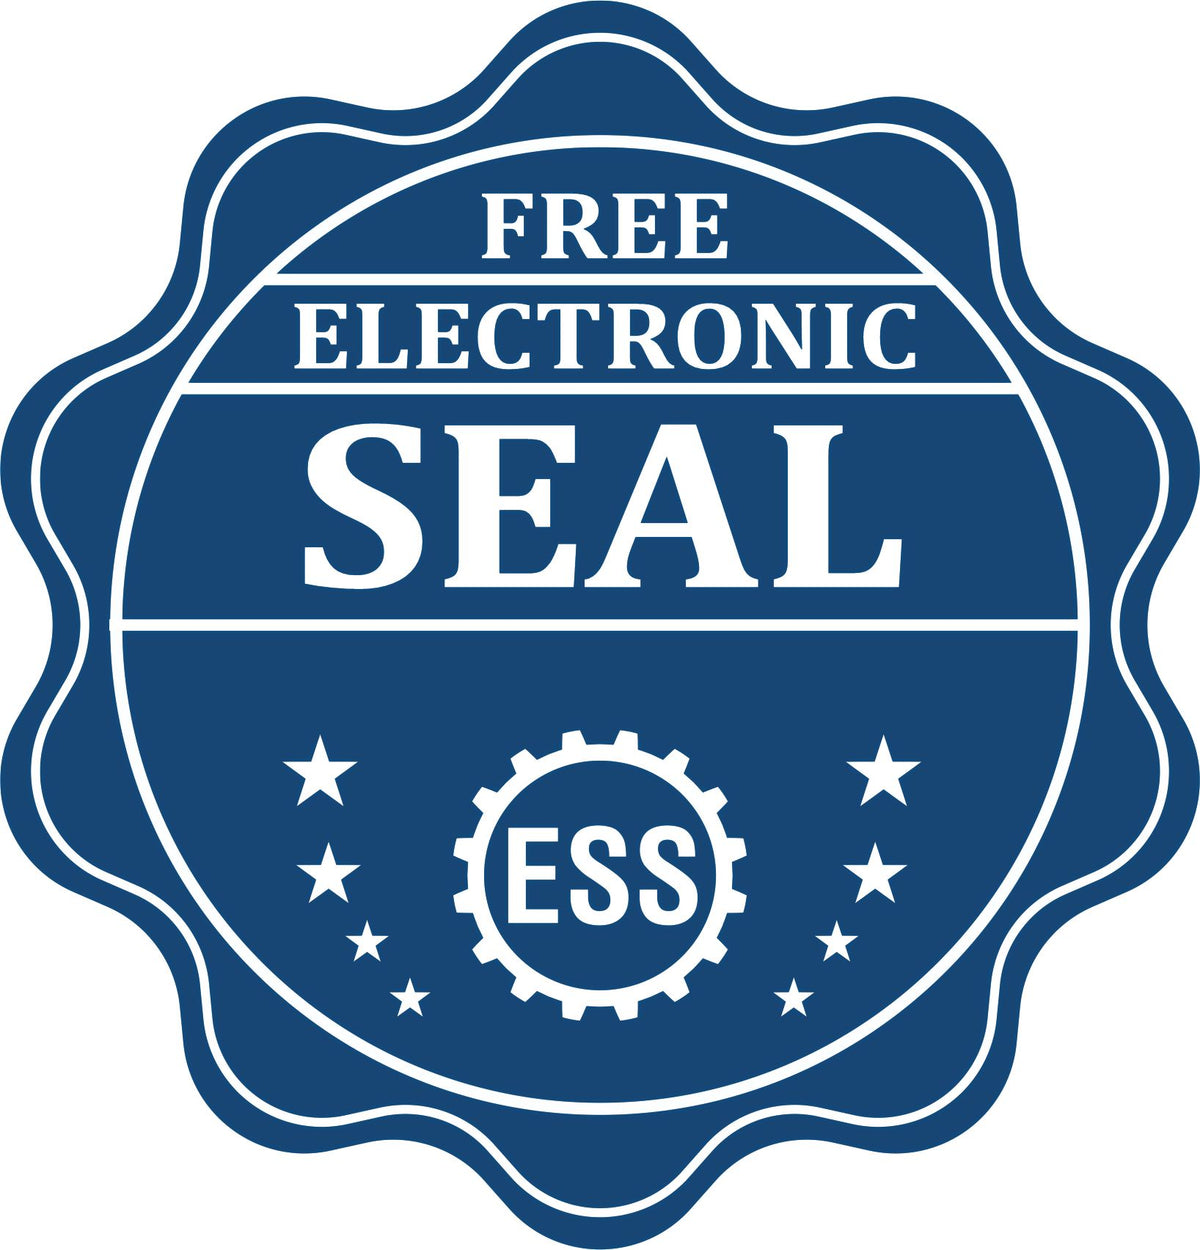 A badge showing a free electronic seal for the Slim Pre-Inked Arkansas Professional Geologist Seal Stamp with stars and the ESS gear on the emblem.